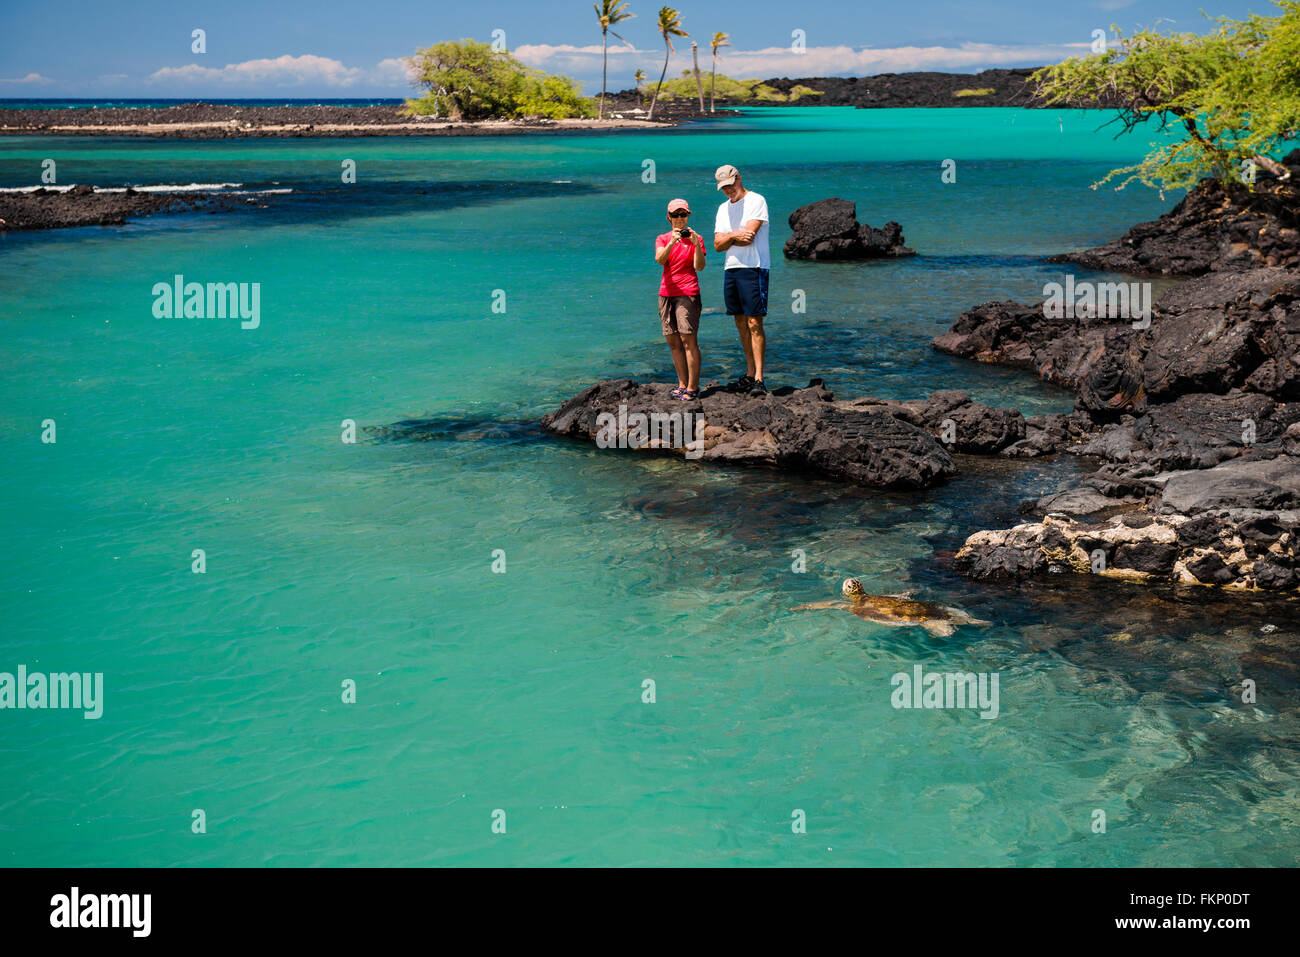 Kiholo Bay on the big island of Hawaii, USA, is a place that sees few people and lots of sea turtles. Stock Photo